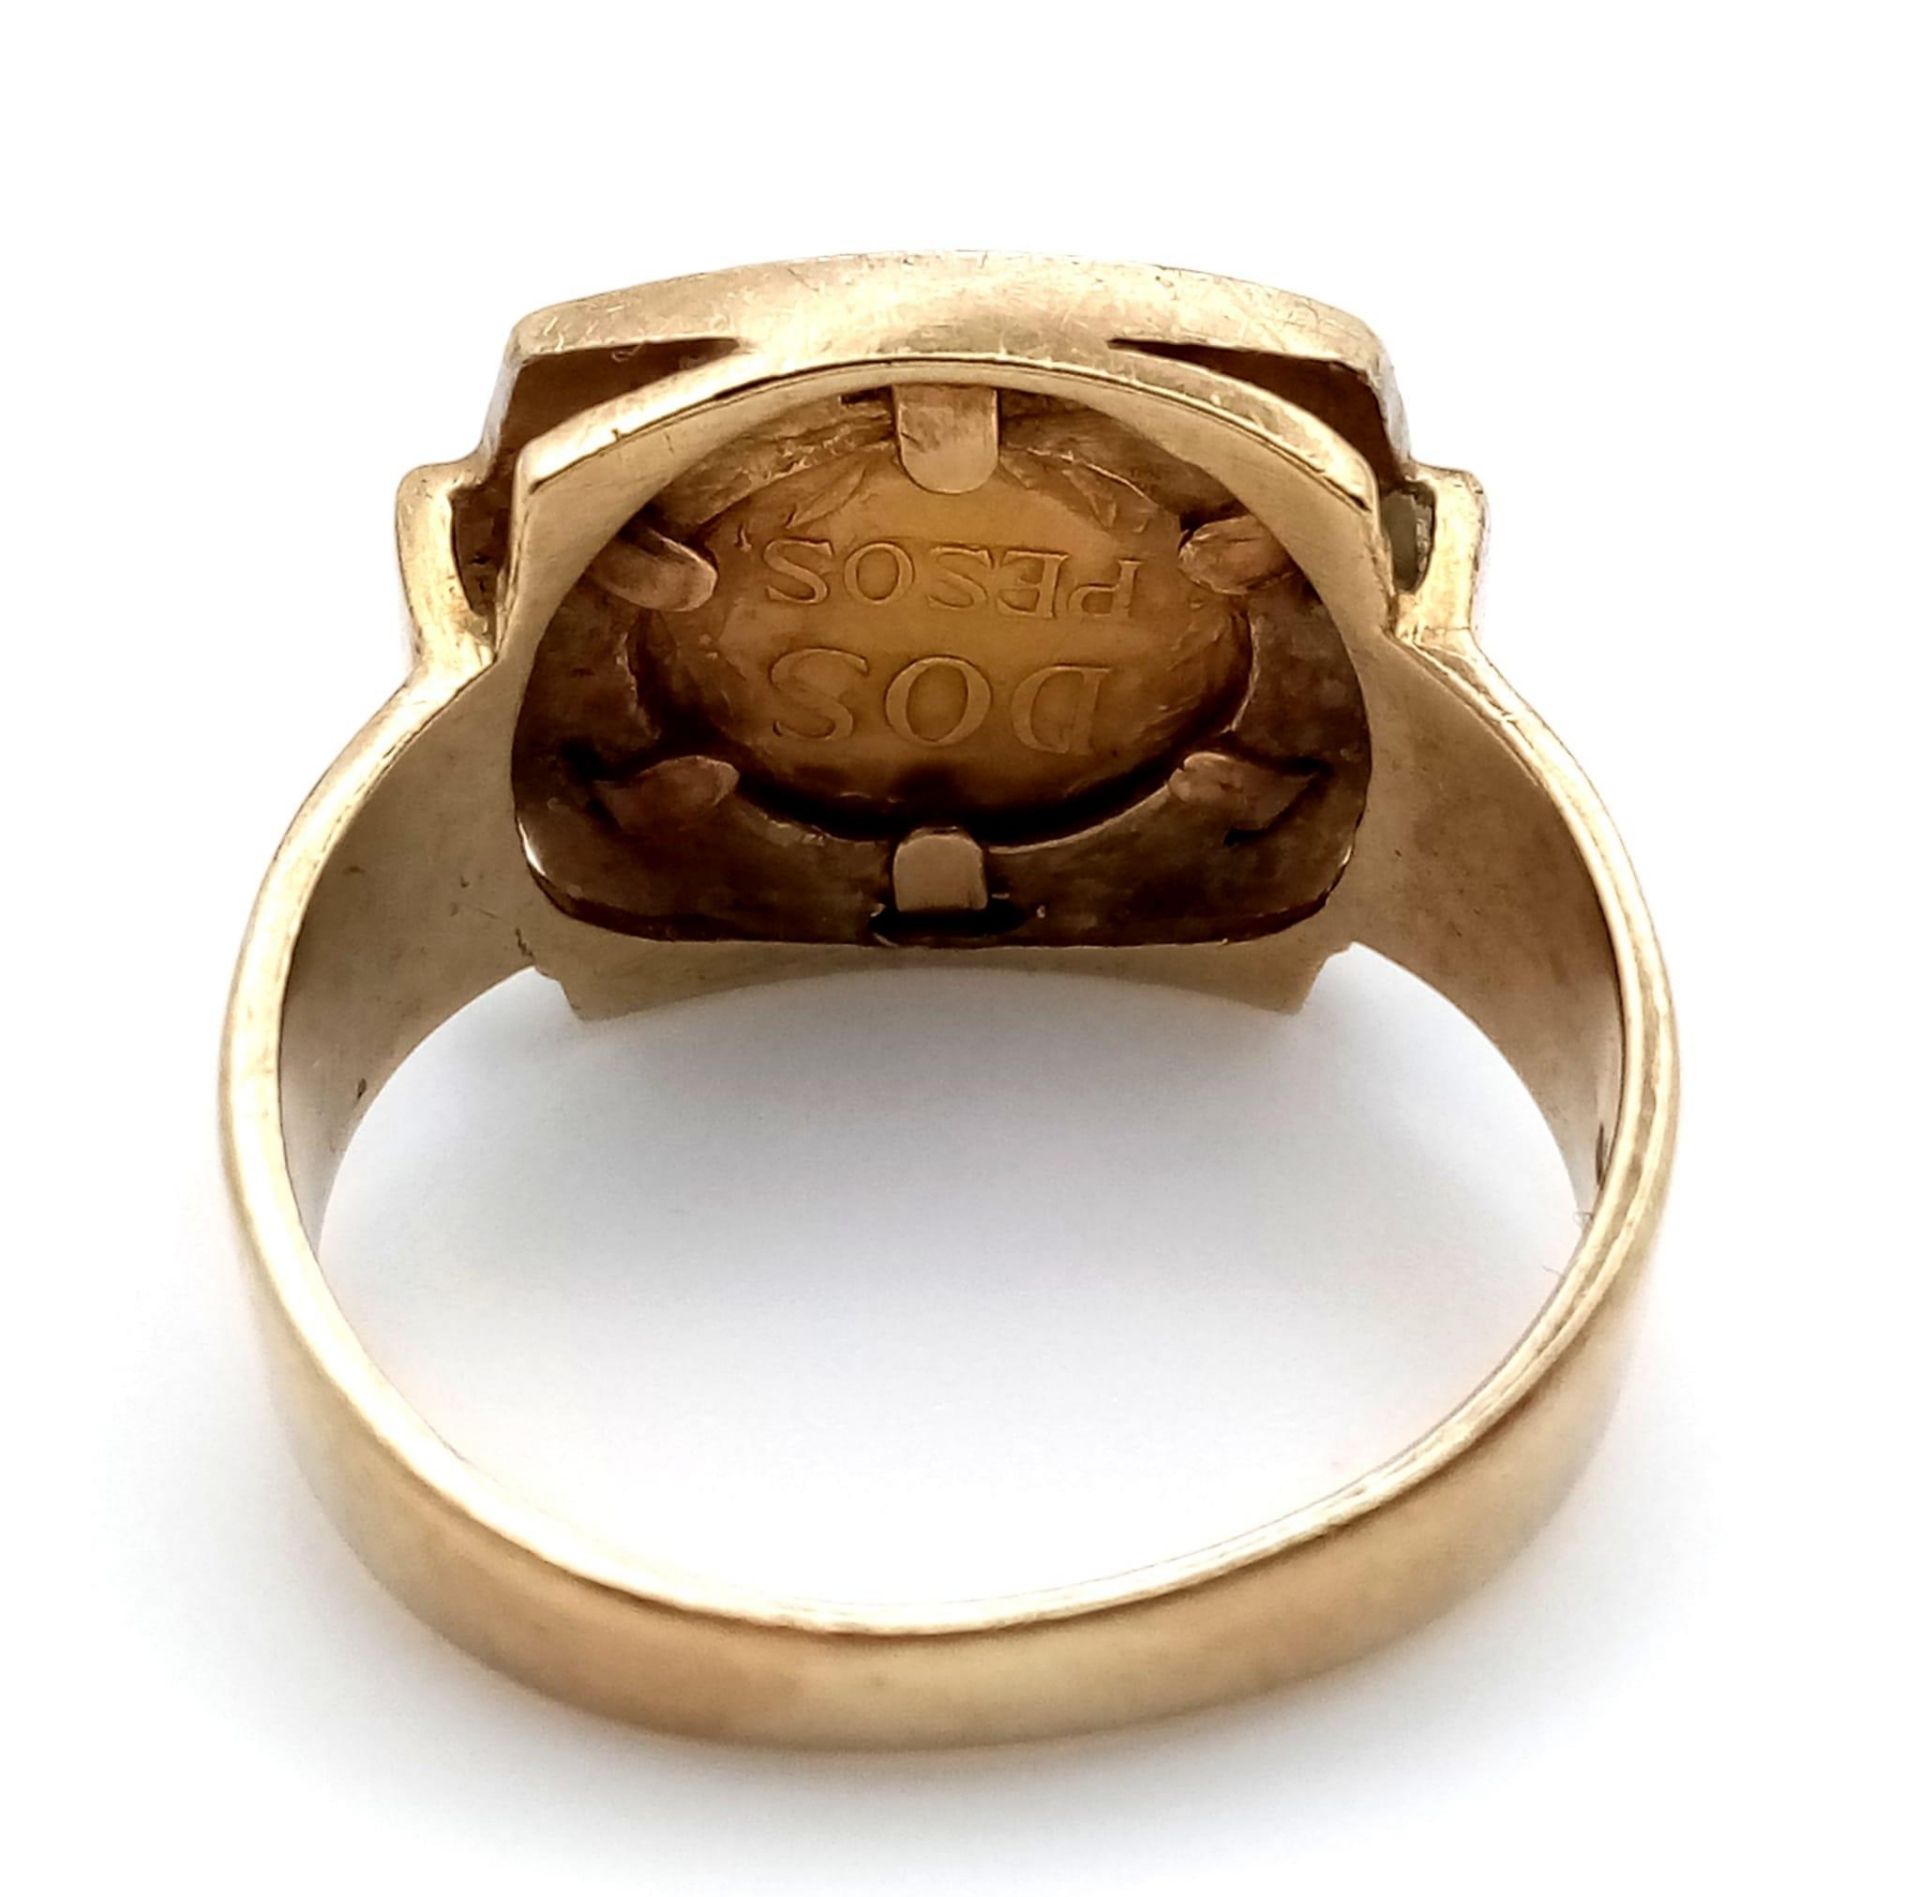 An 18K Gold Dos Pesos Mexican Coin set in a 9K Gold Ring. 6.6g total weight. Size R. - Image 3 of 4